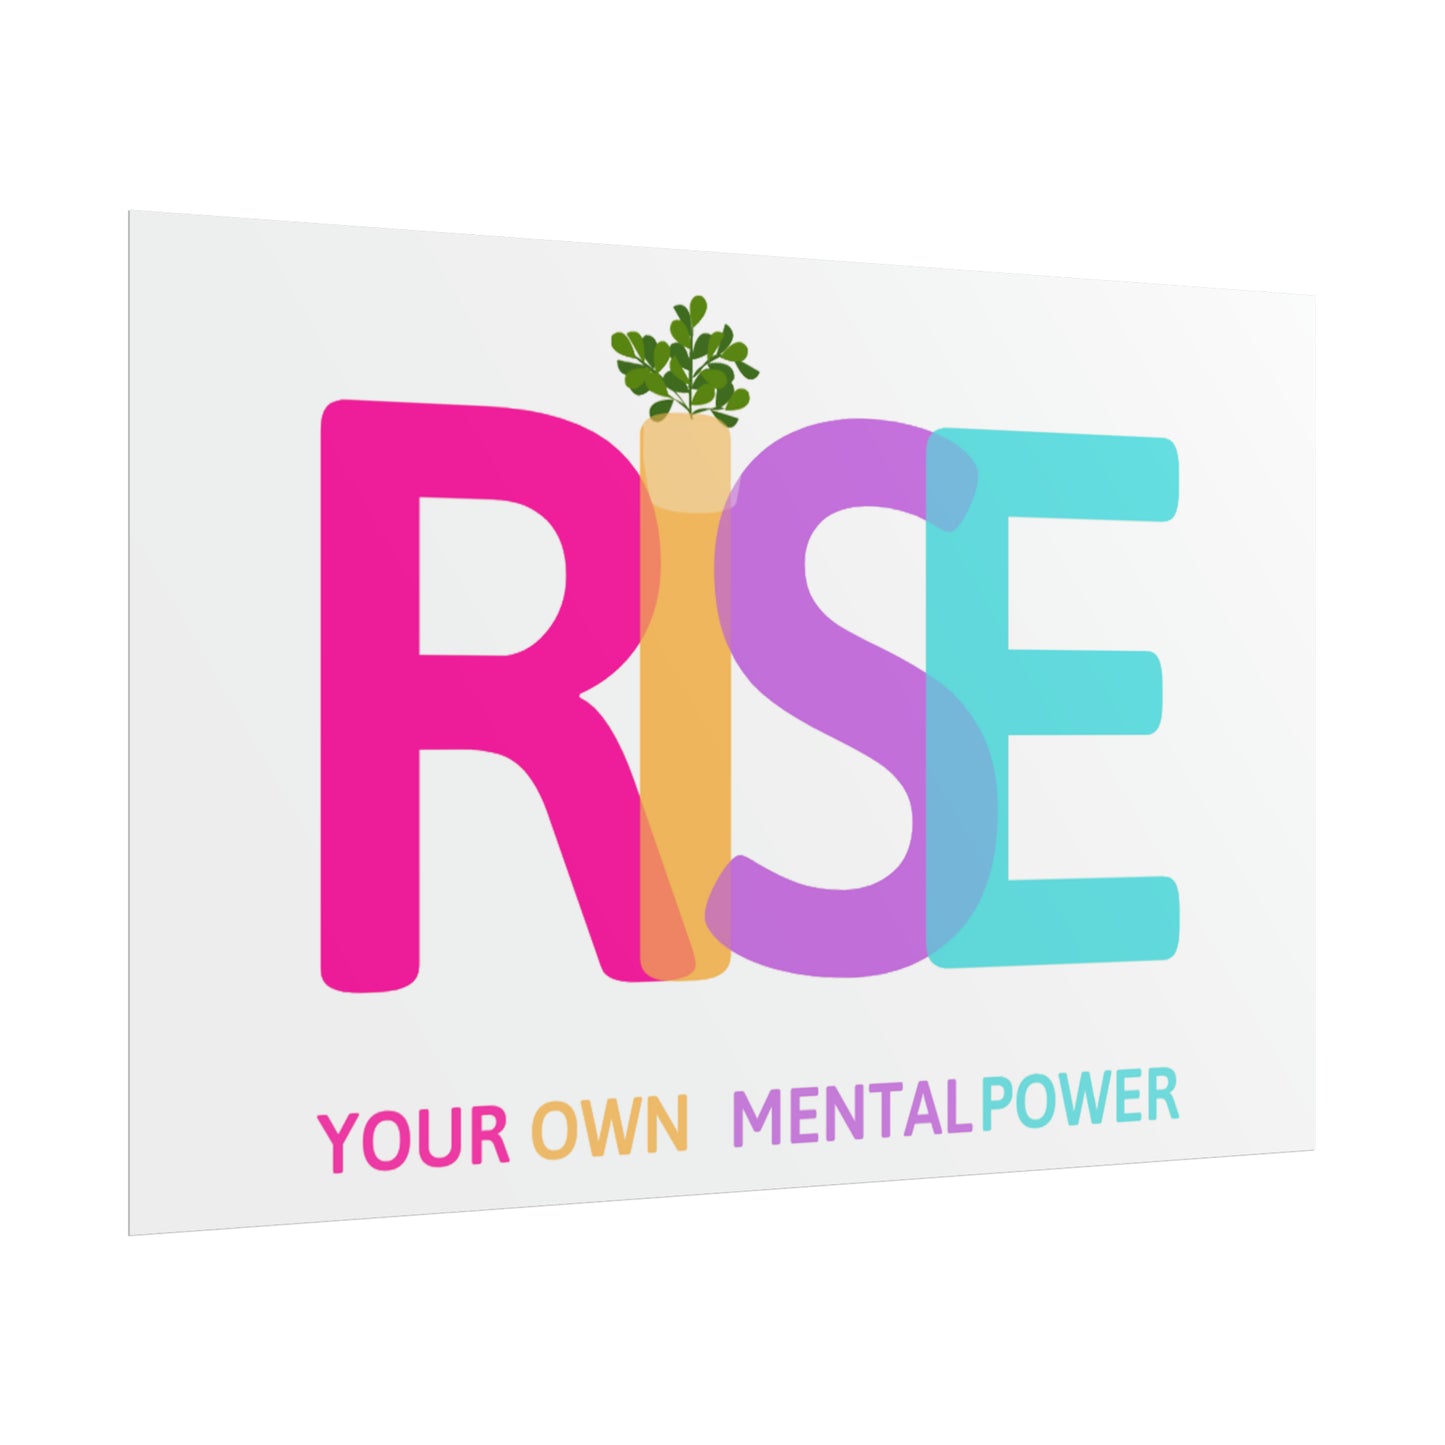 PoM's Self Motivation series ... RISE ... Your own mental Power (affirmation). - Rolled Poster (180, 200 or 285 gsm paper options)